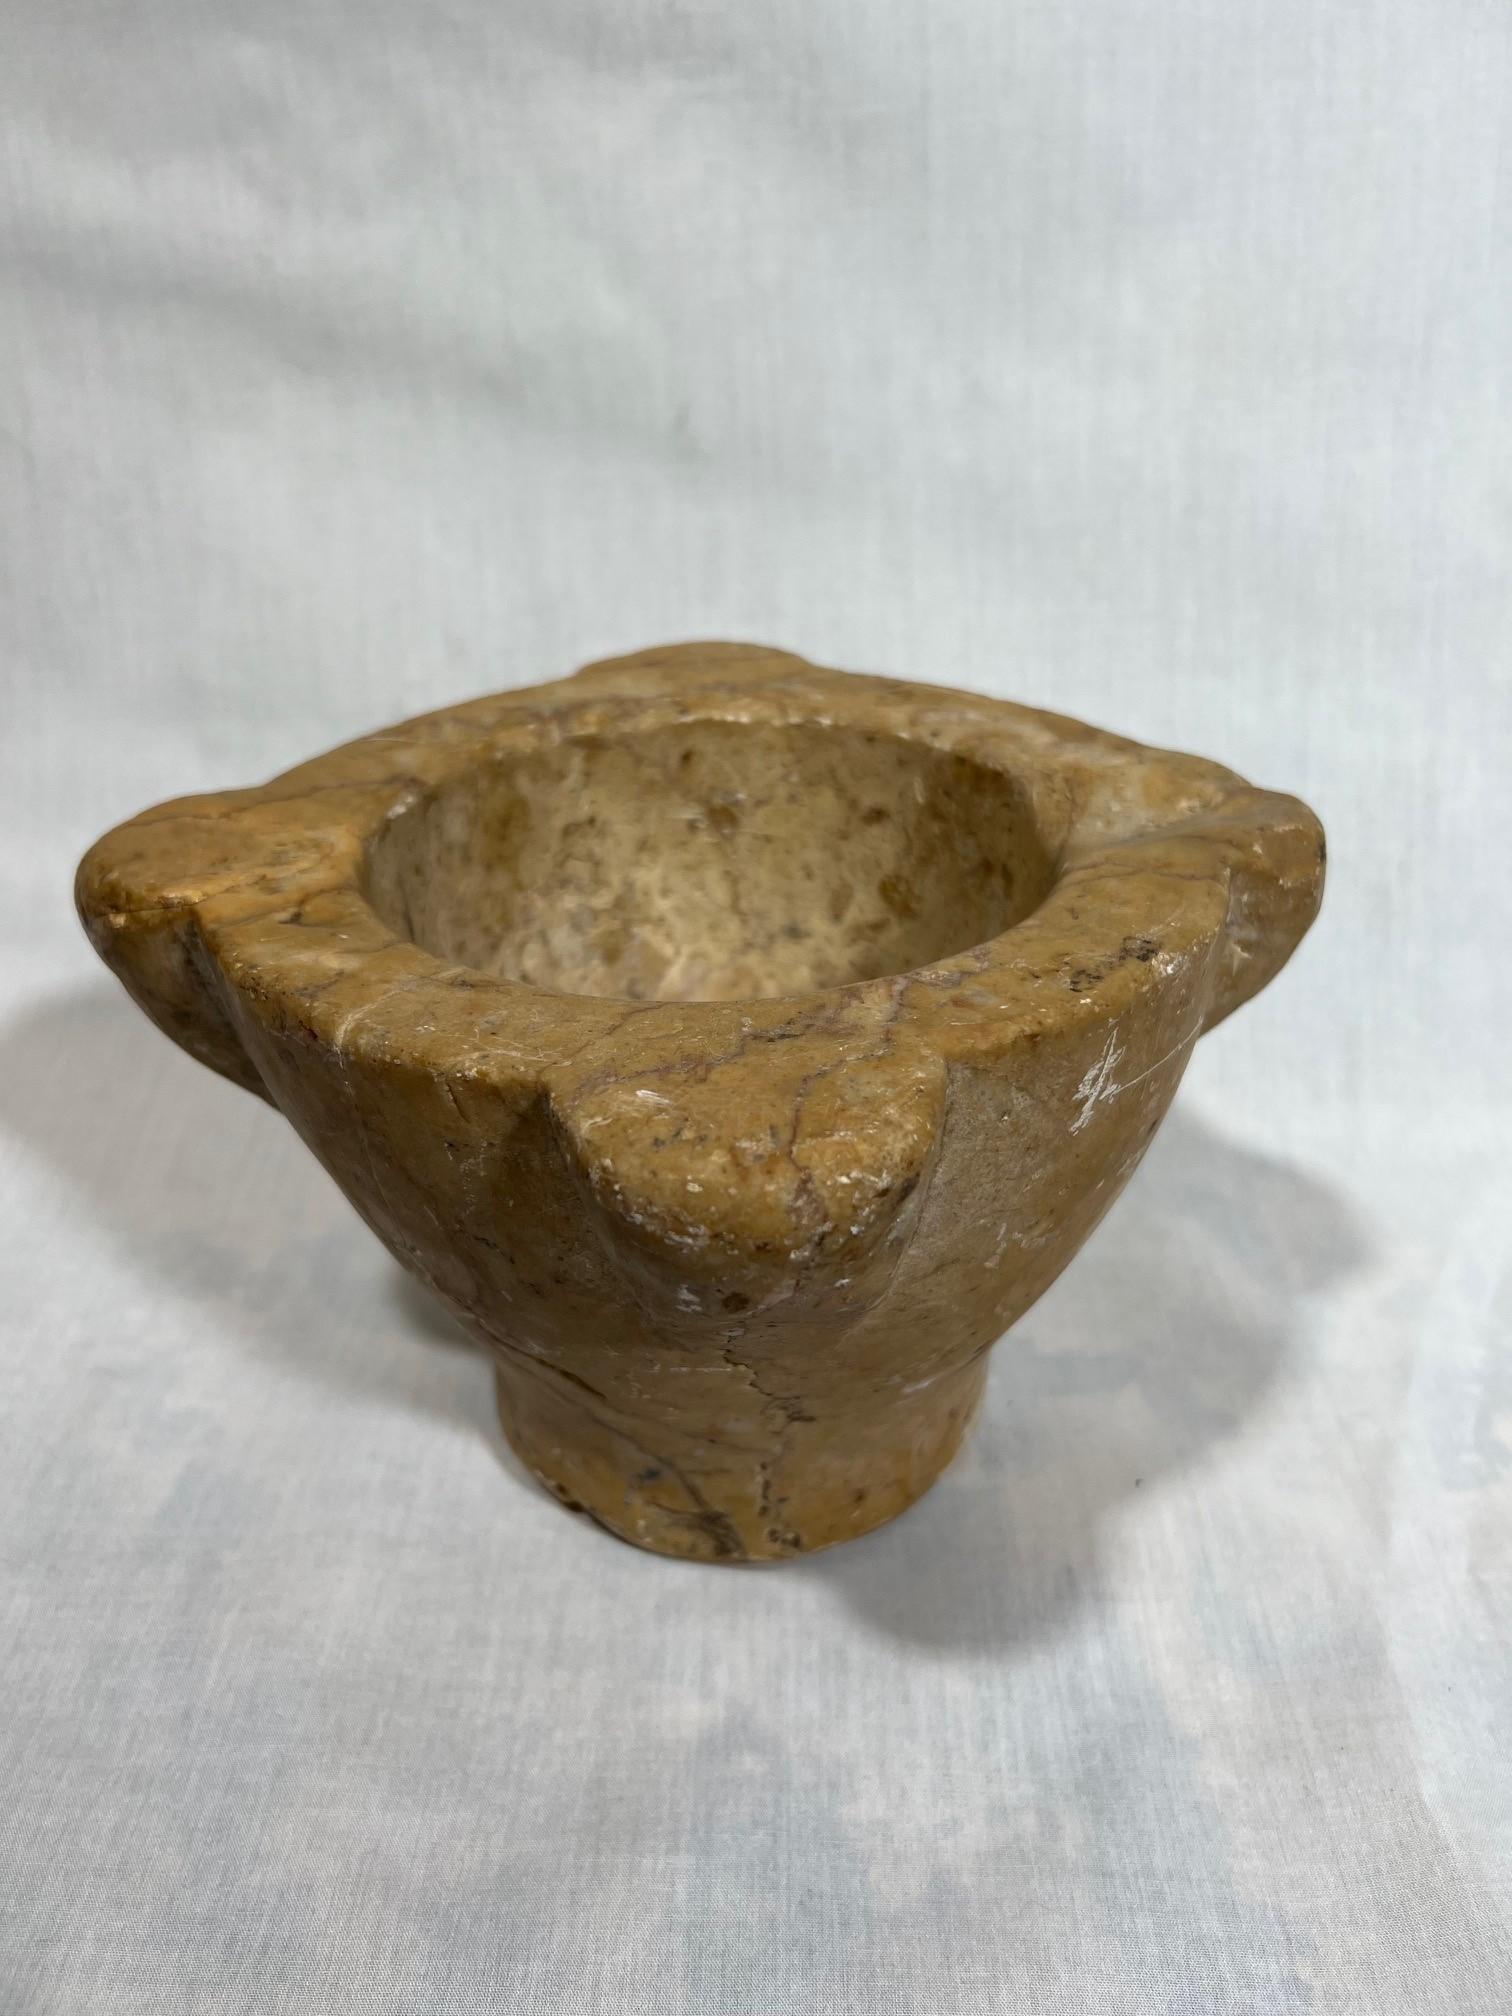 A very charming 18th century mortar from the Catalan region in Spain. Beautifully carved from marble. A wonderful accessory piece for any kitchen, bathroom, or table top. Beautiful patina.